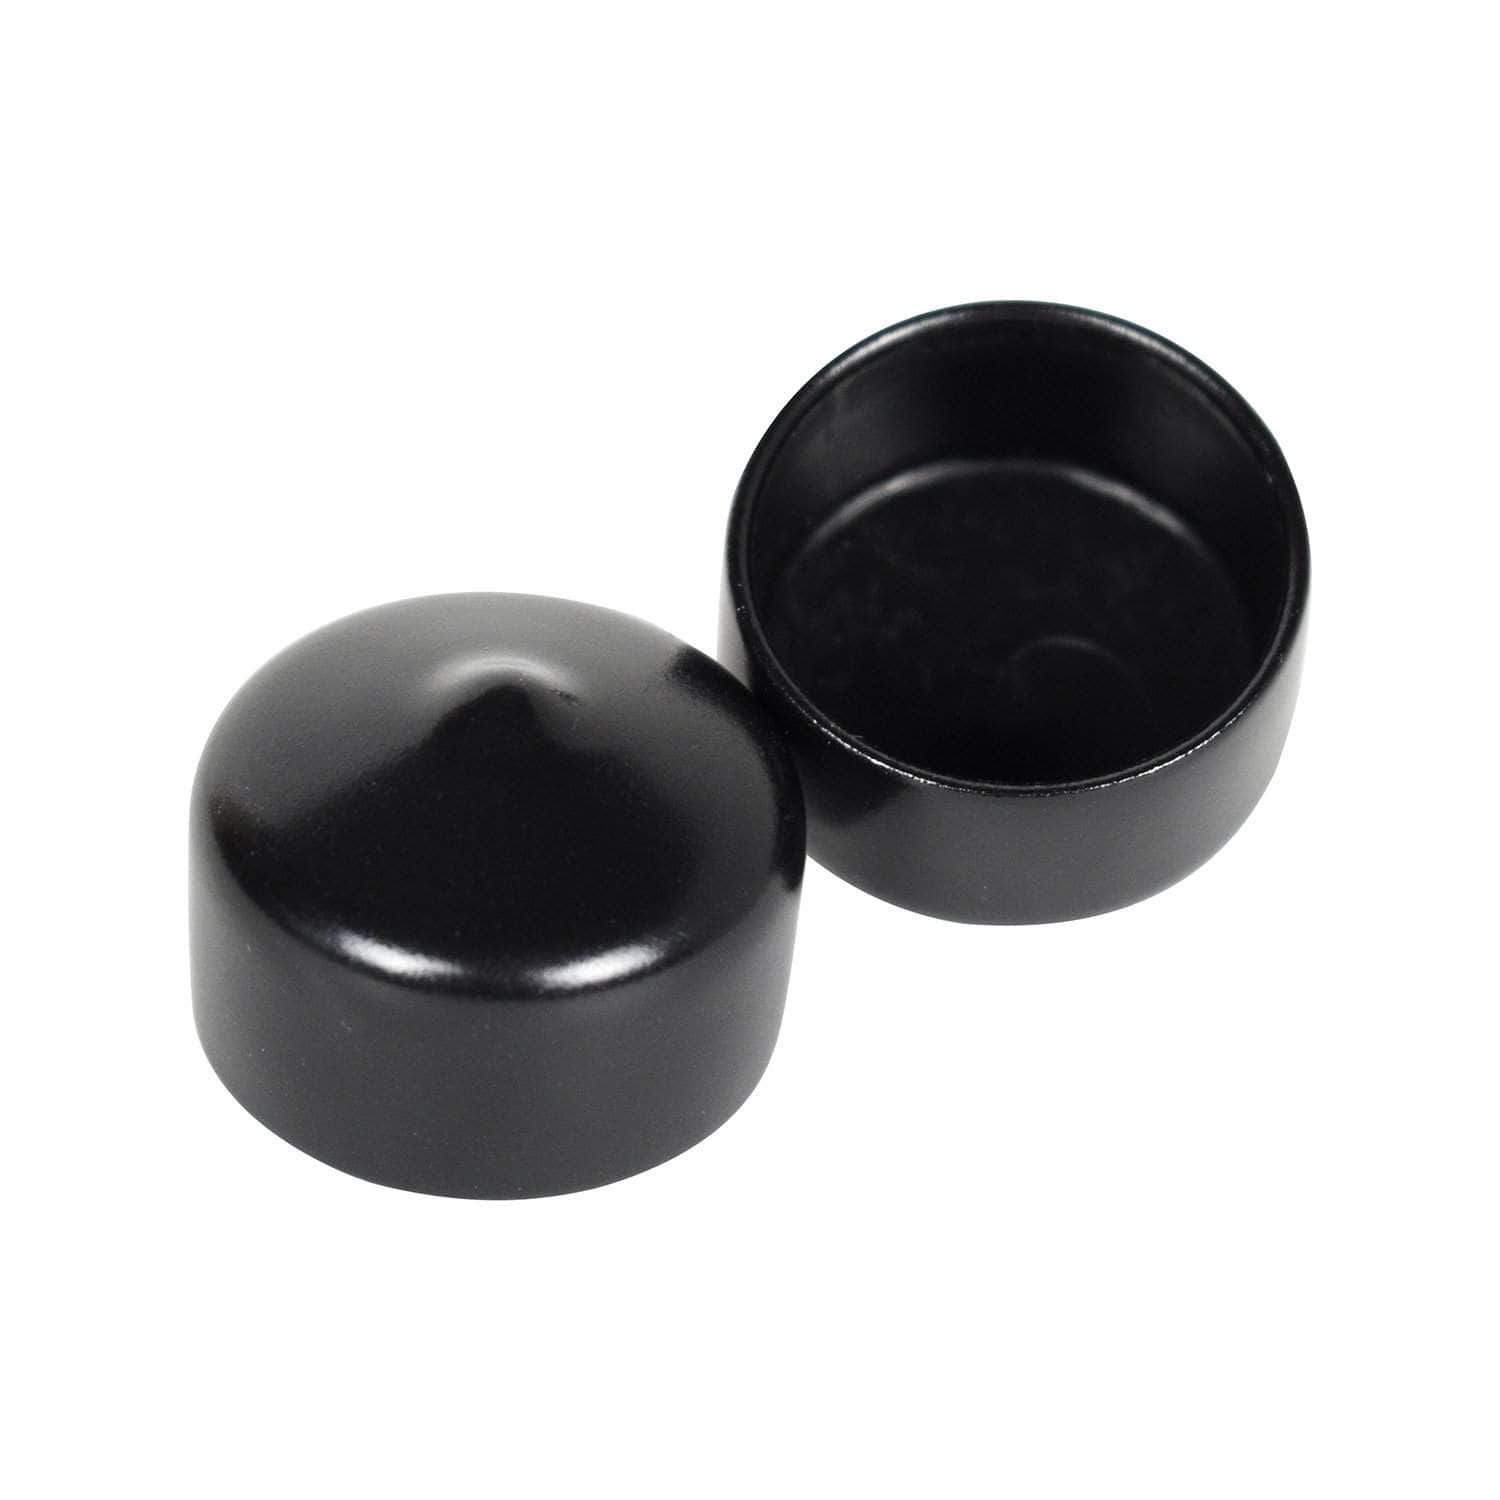 Towel rail end caps for use with Aga range cookers (pair)